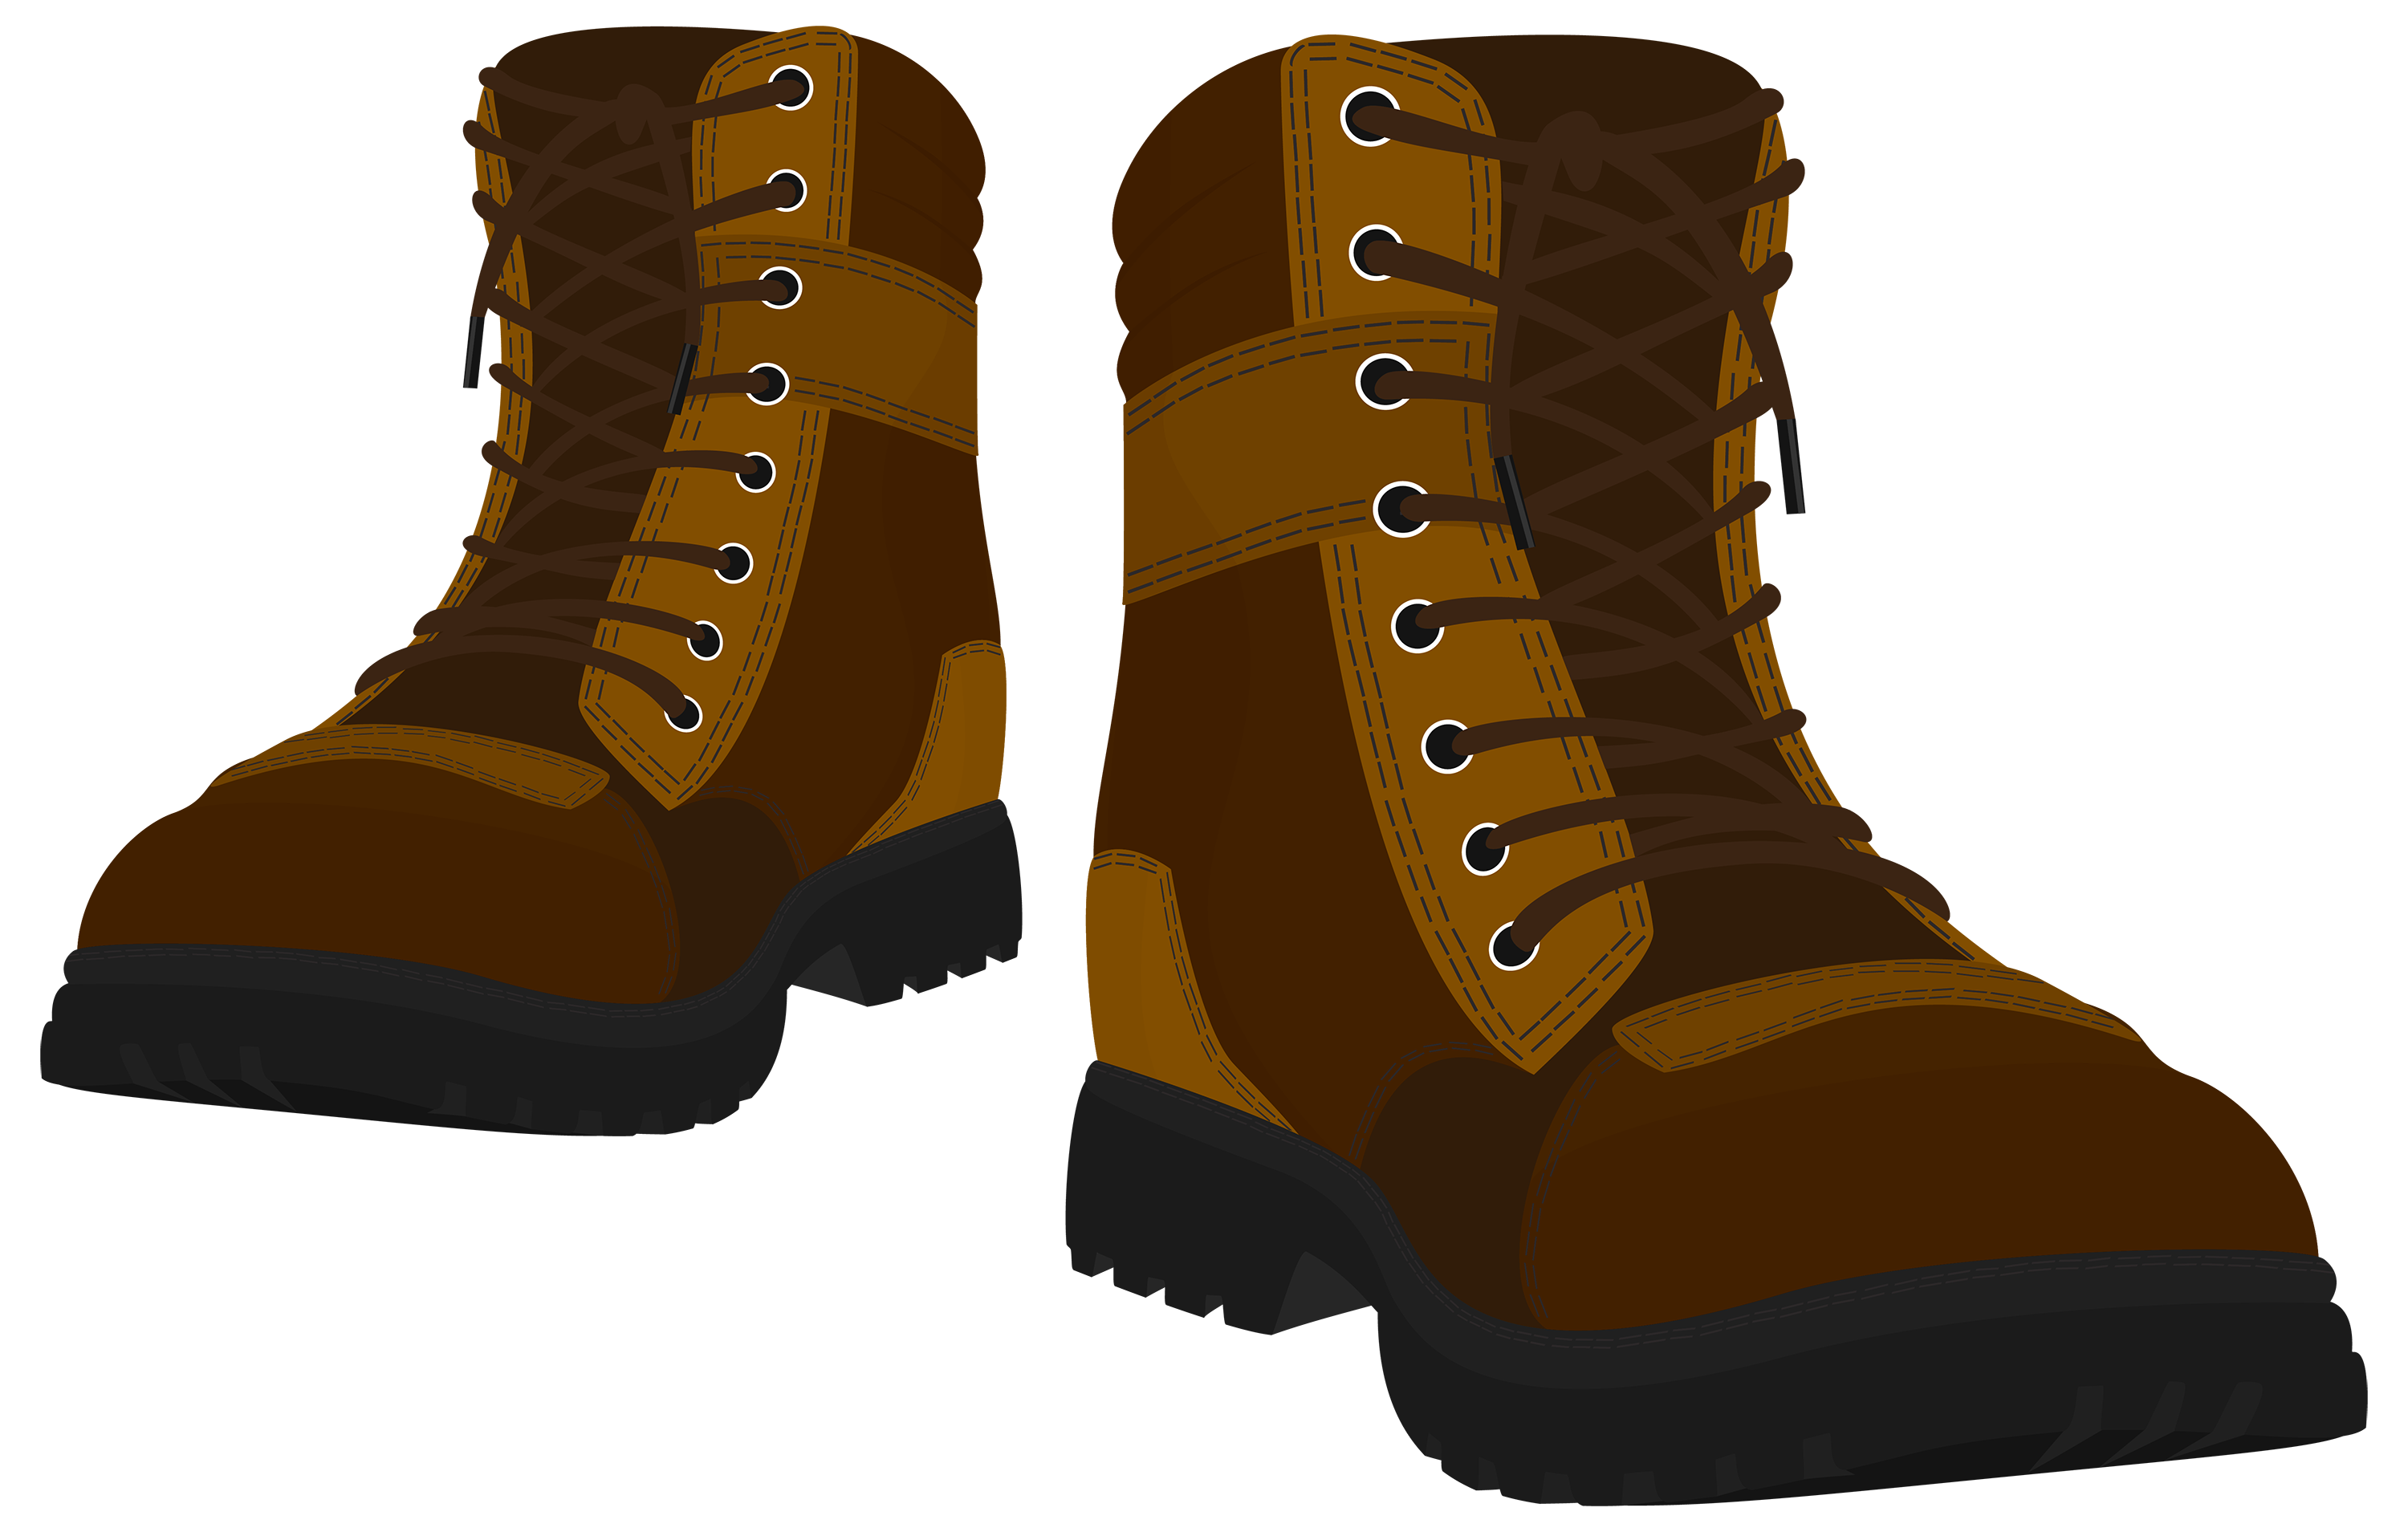 Boots Clip Art Gallery